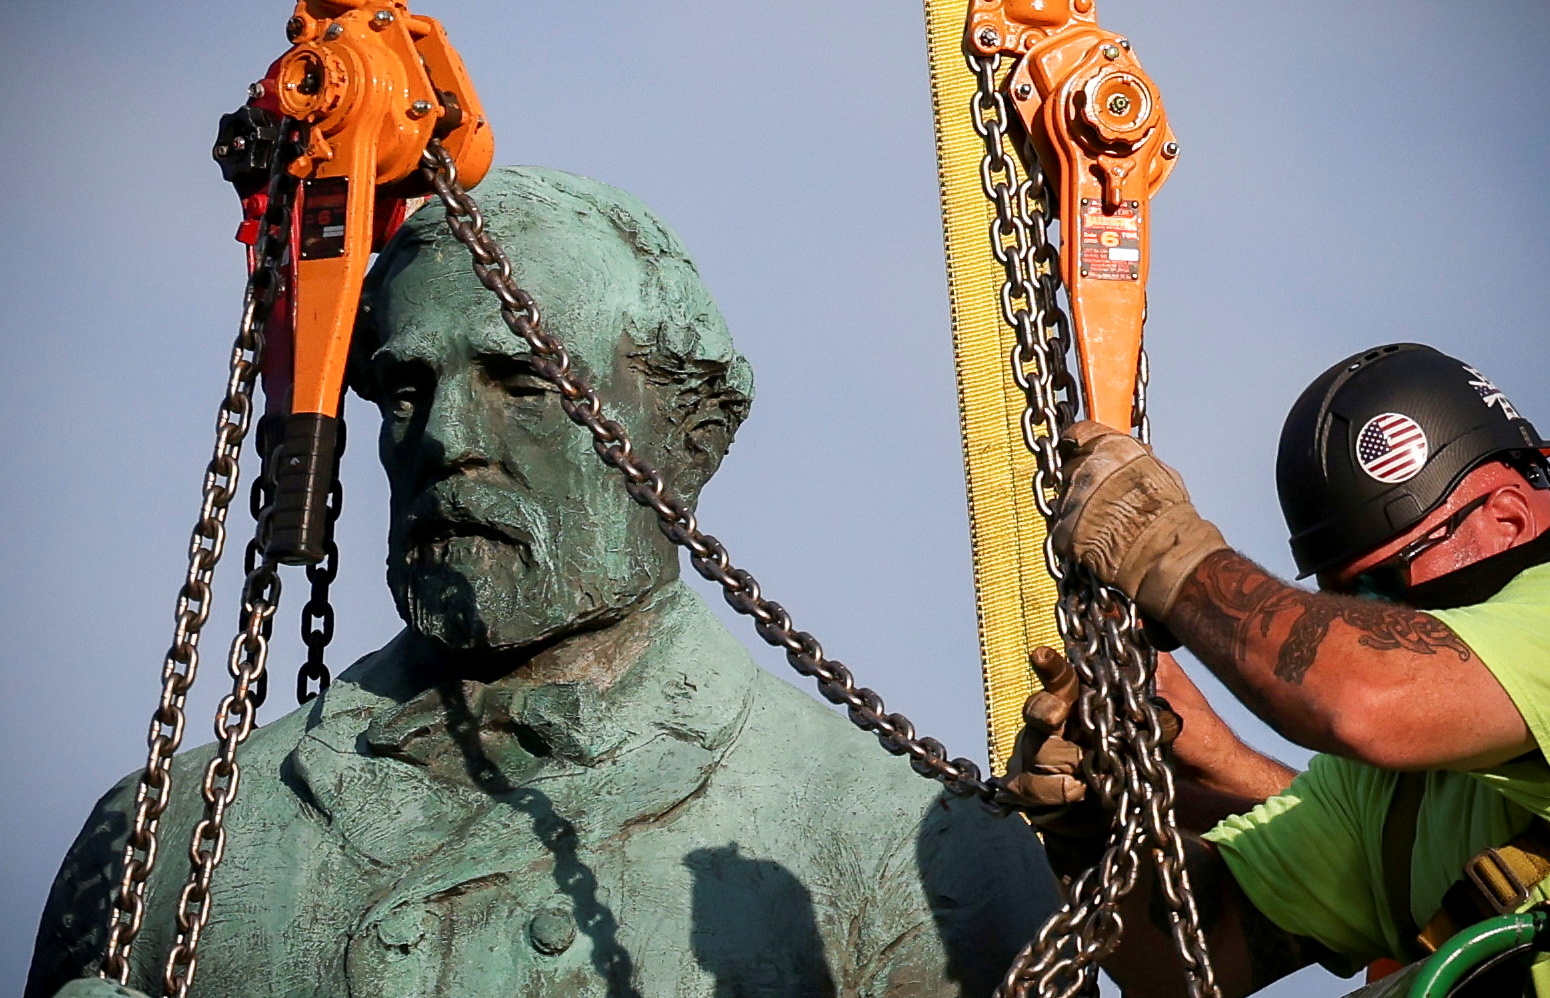 Workers remove a statue of Confederate General Robert E. Lee, in Charlottesville